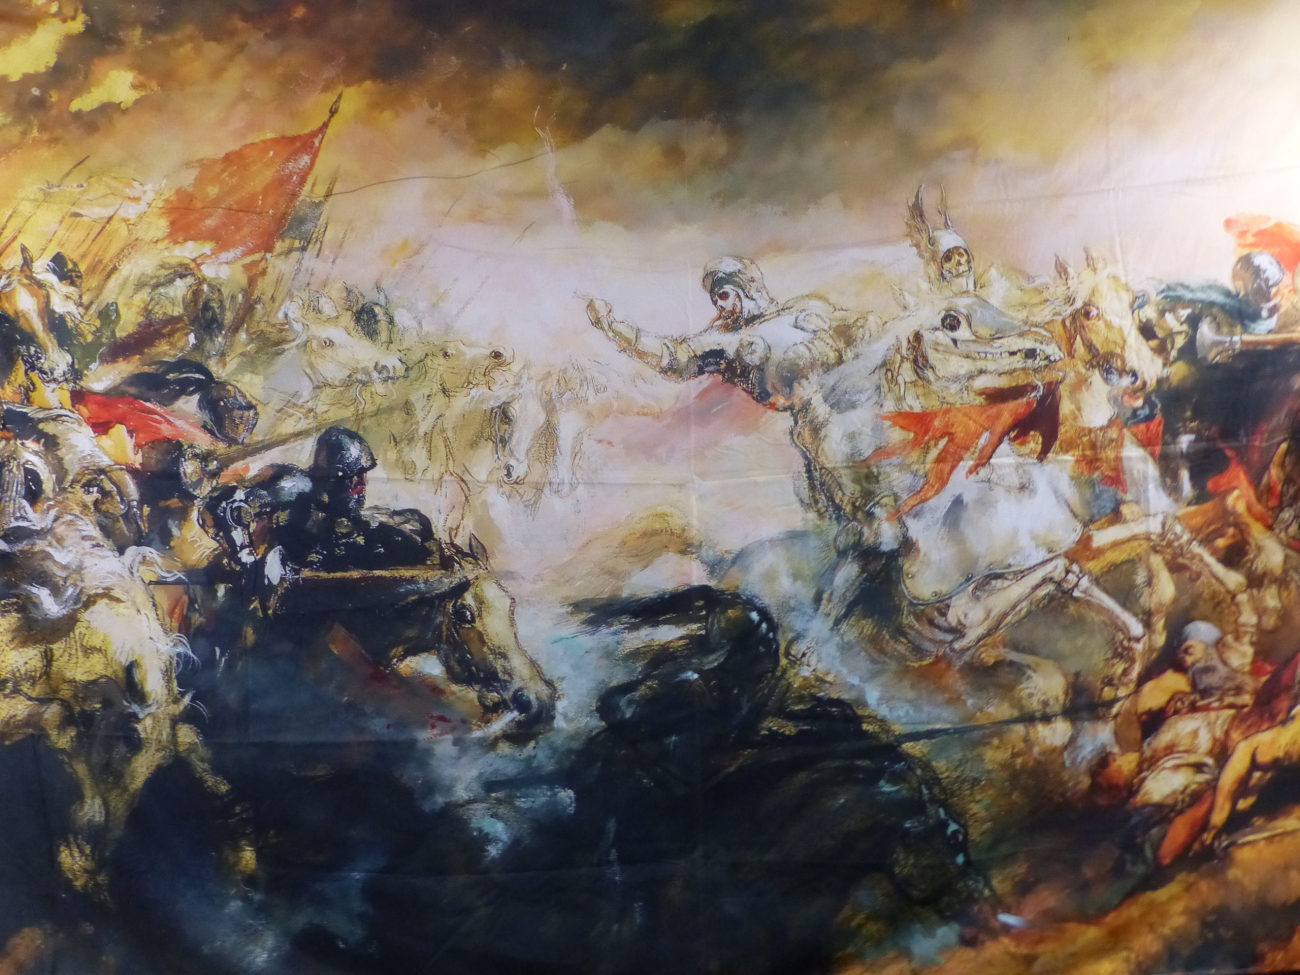 A LARGE IMPRESSIVE PICTORIAL WALL HANGING DEPICTING ETHEREAL BATTLE SCENE.